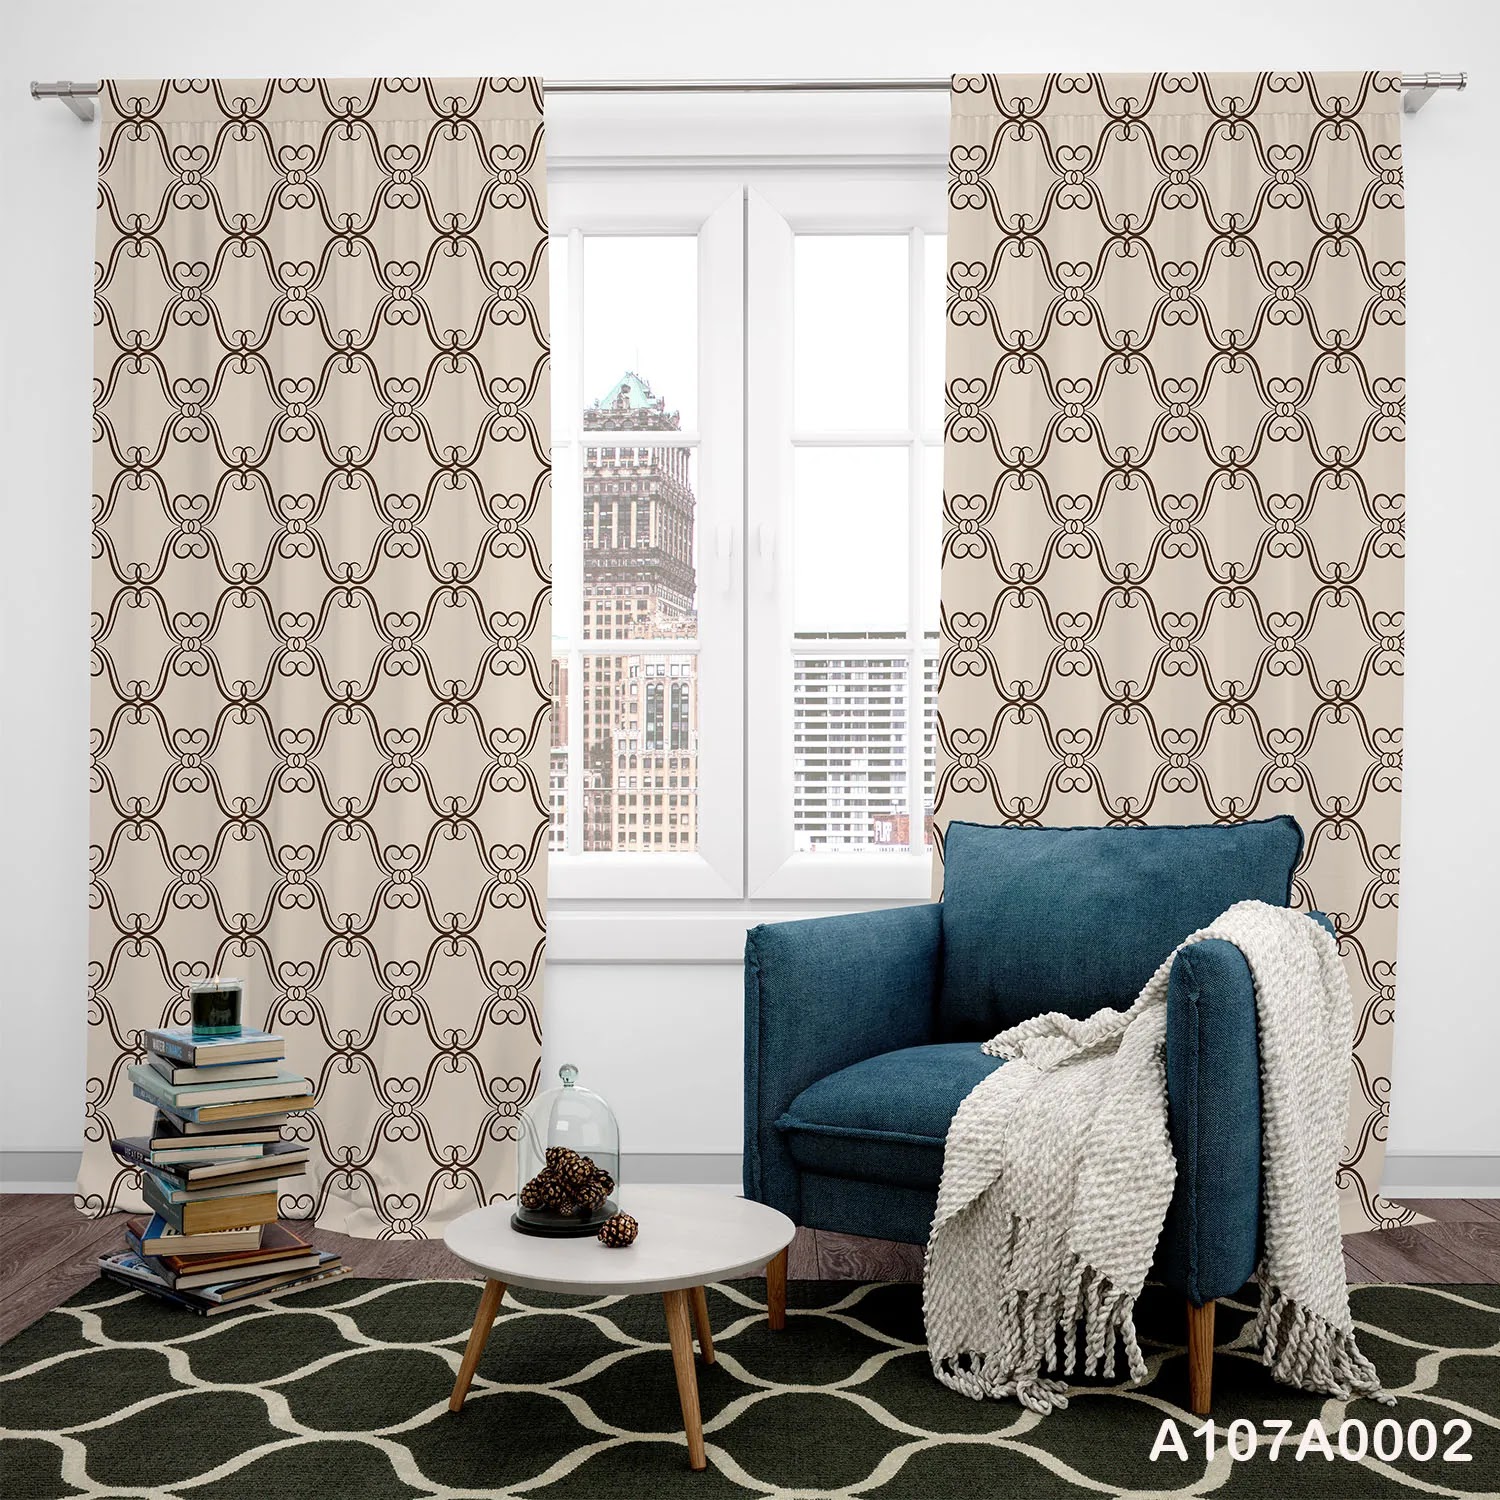 Curtains in  beige and black color for office and living rooms